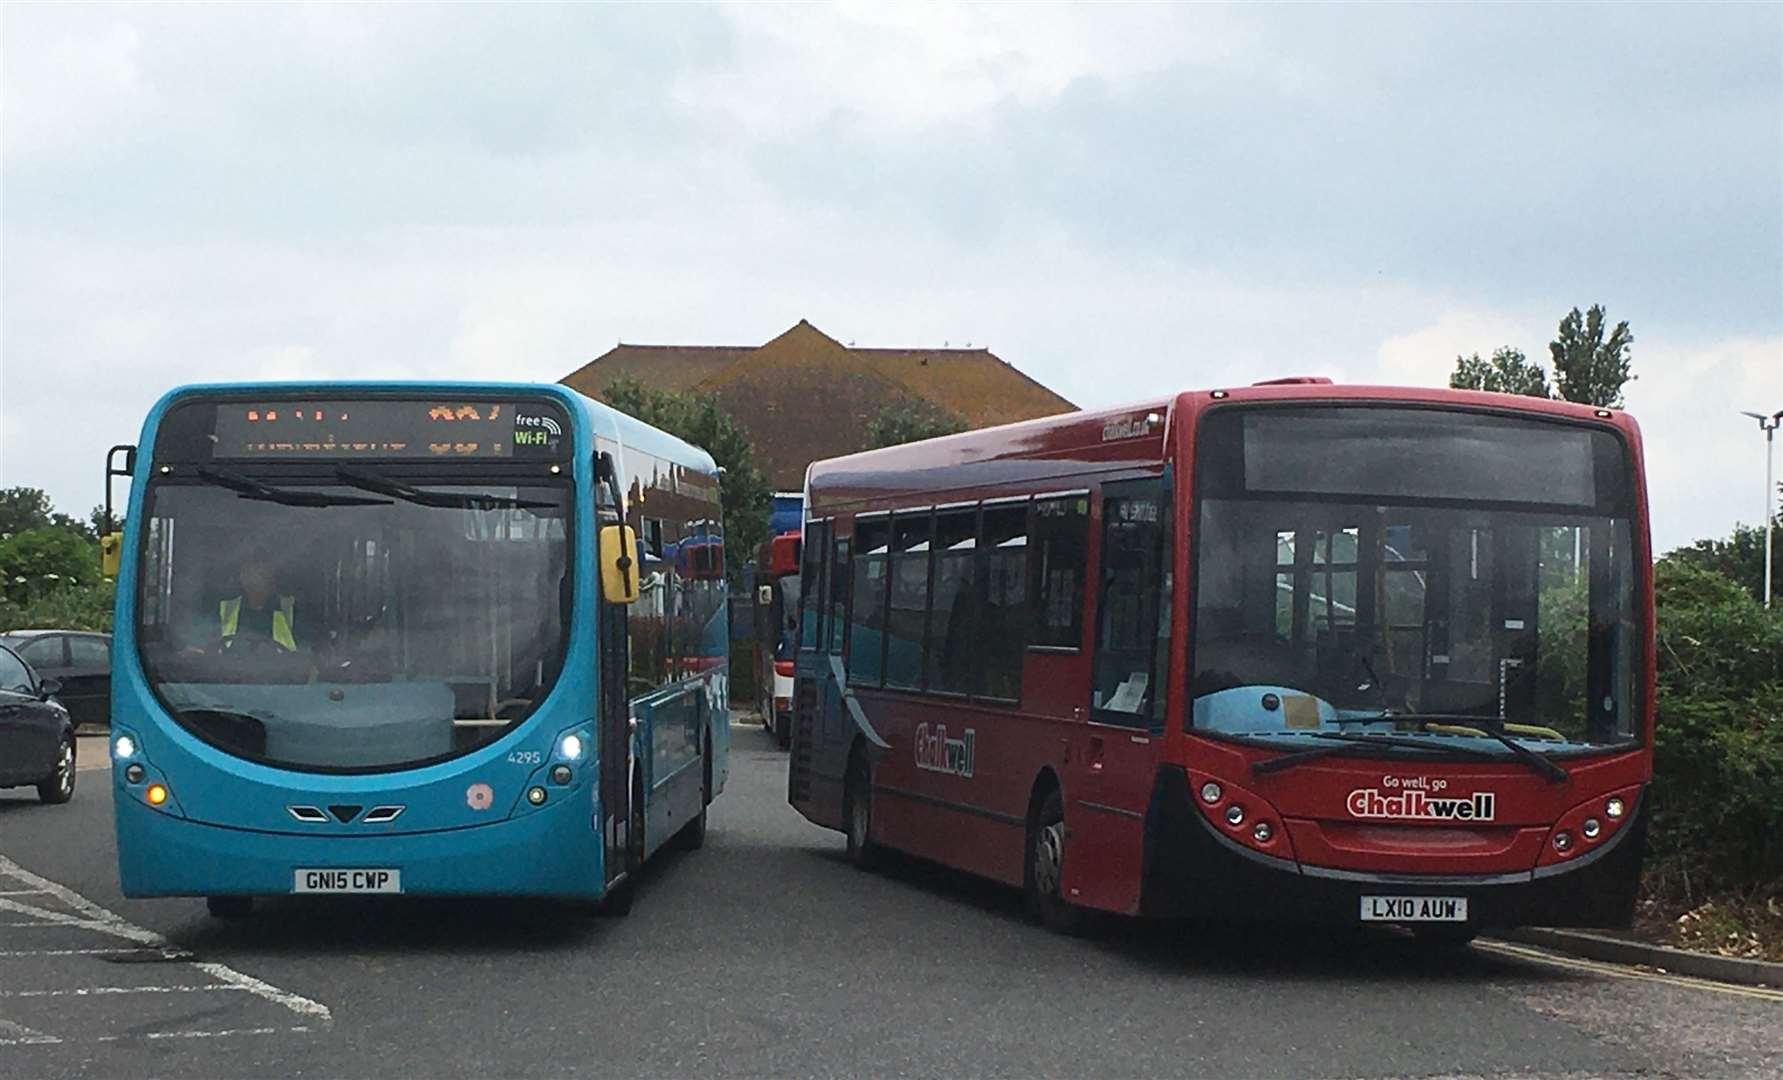 Arriva and Chalkwell buses sharing the Tesco bus stop in Sheerness